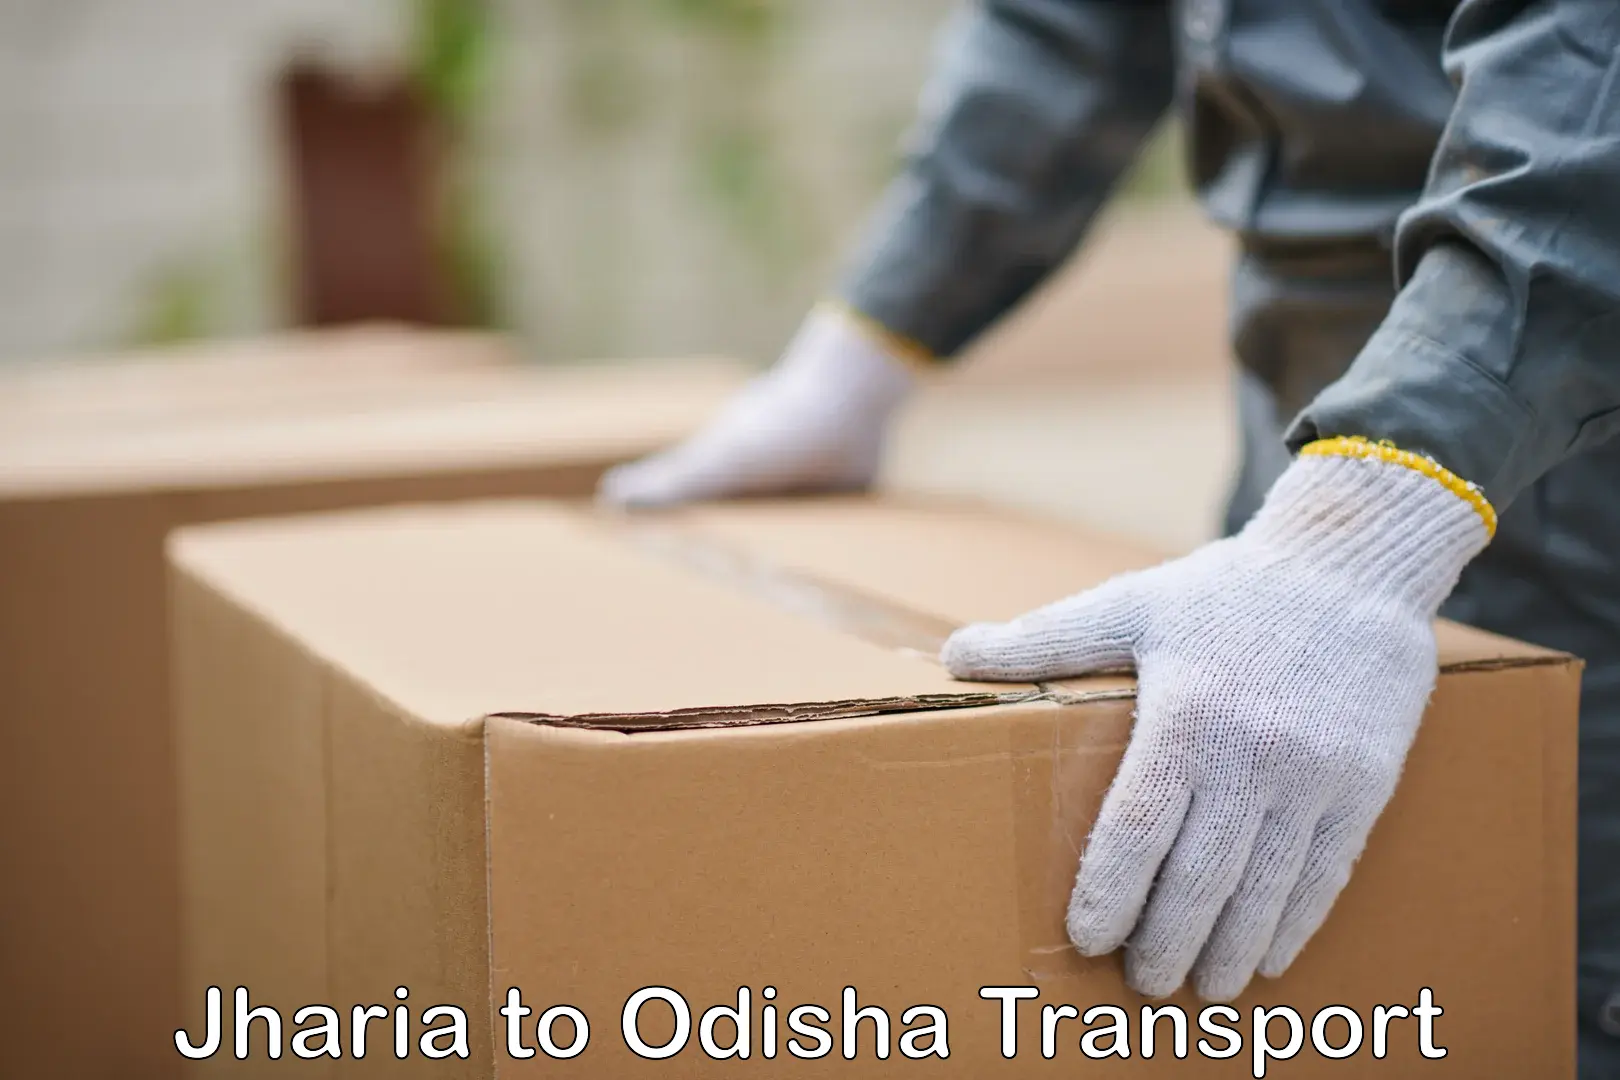 Part load transport service in India Jharia to Paradip Port